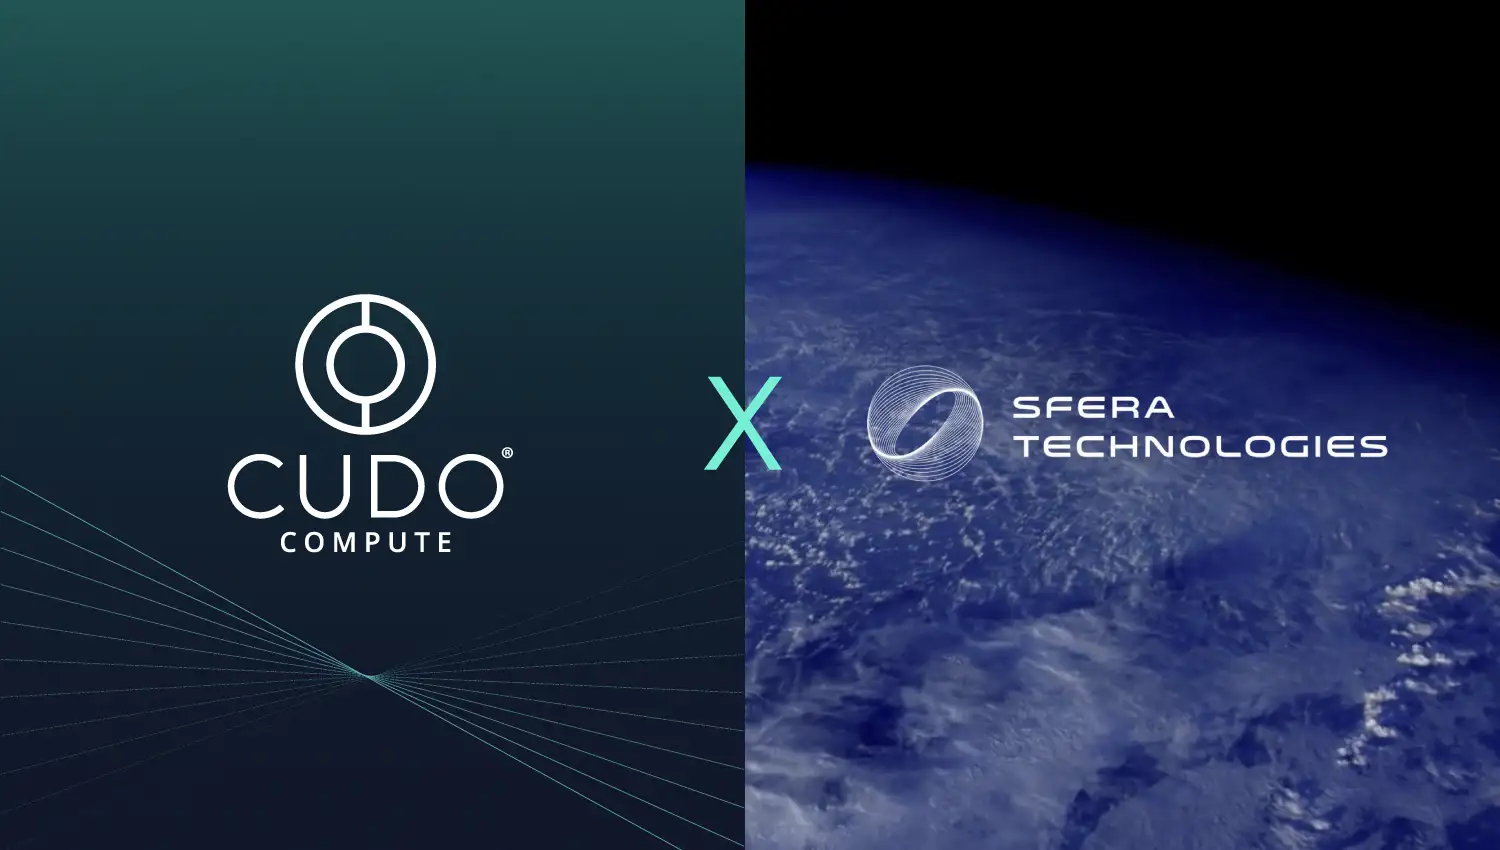 Cudos to Support Sfera Technologies' Ground-Based Space Infrastructure cover photo